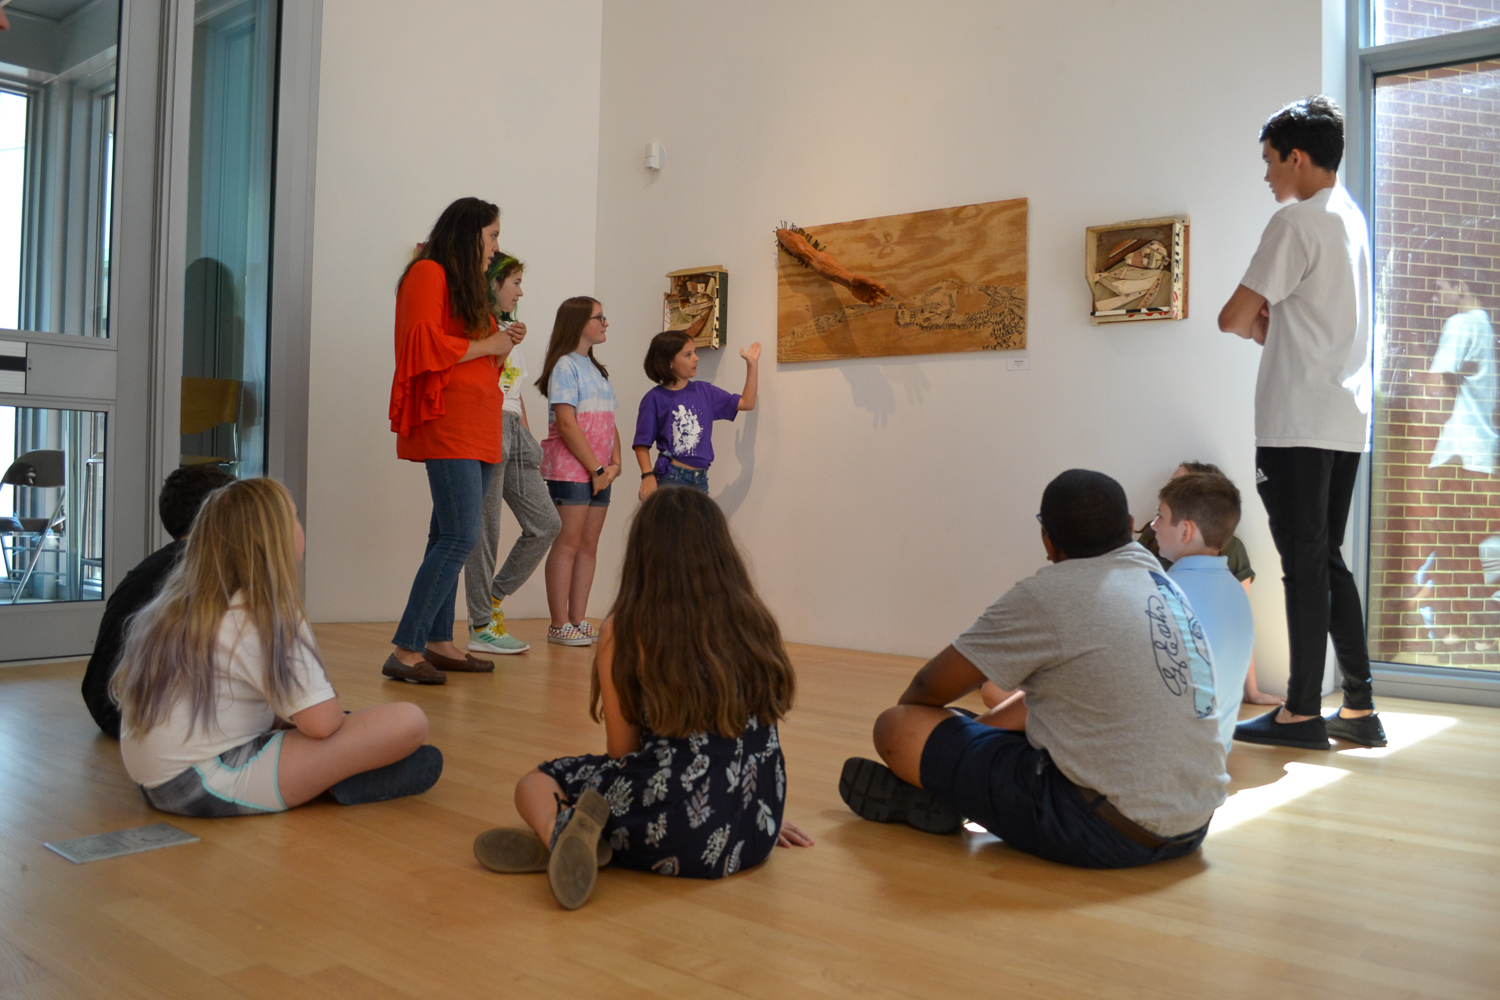 Summer campers discuss art in the galleries at OOMA